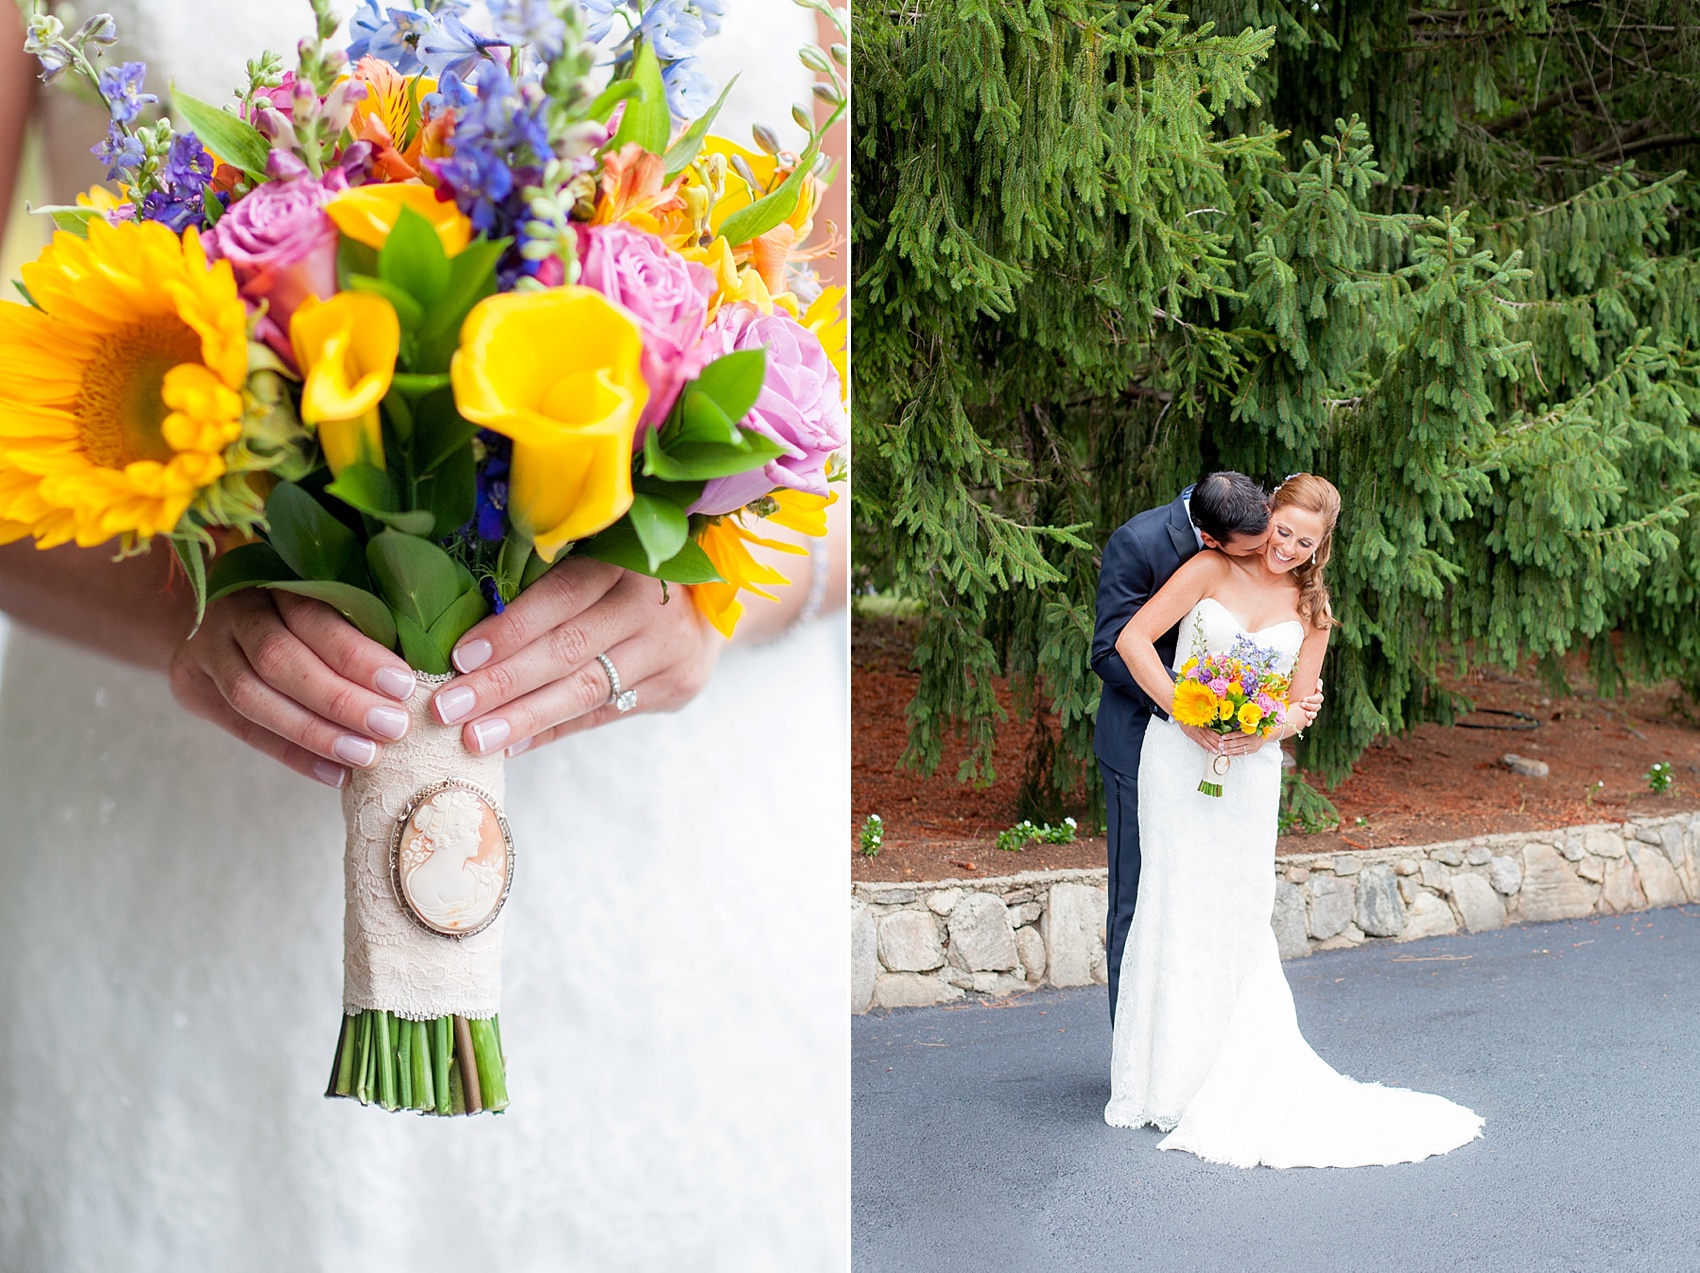 Perona Farms wedding photos bride and groom and colorful sunflower bouquet for their summer celebration. Pictures by New Jersey photographer Mikkel Paige Photography.